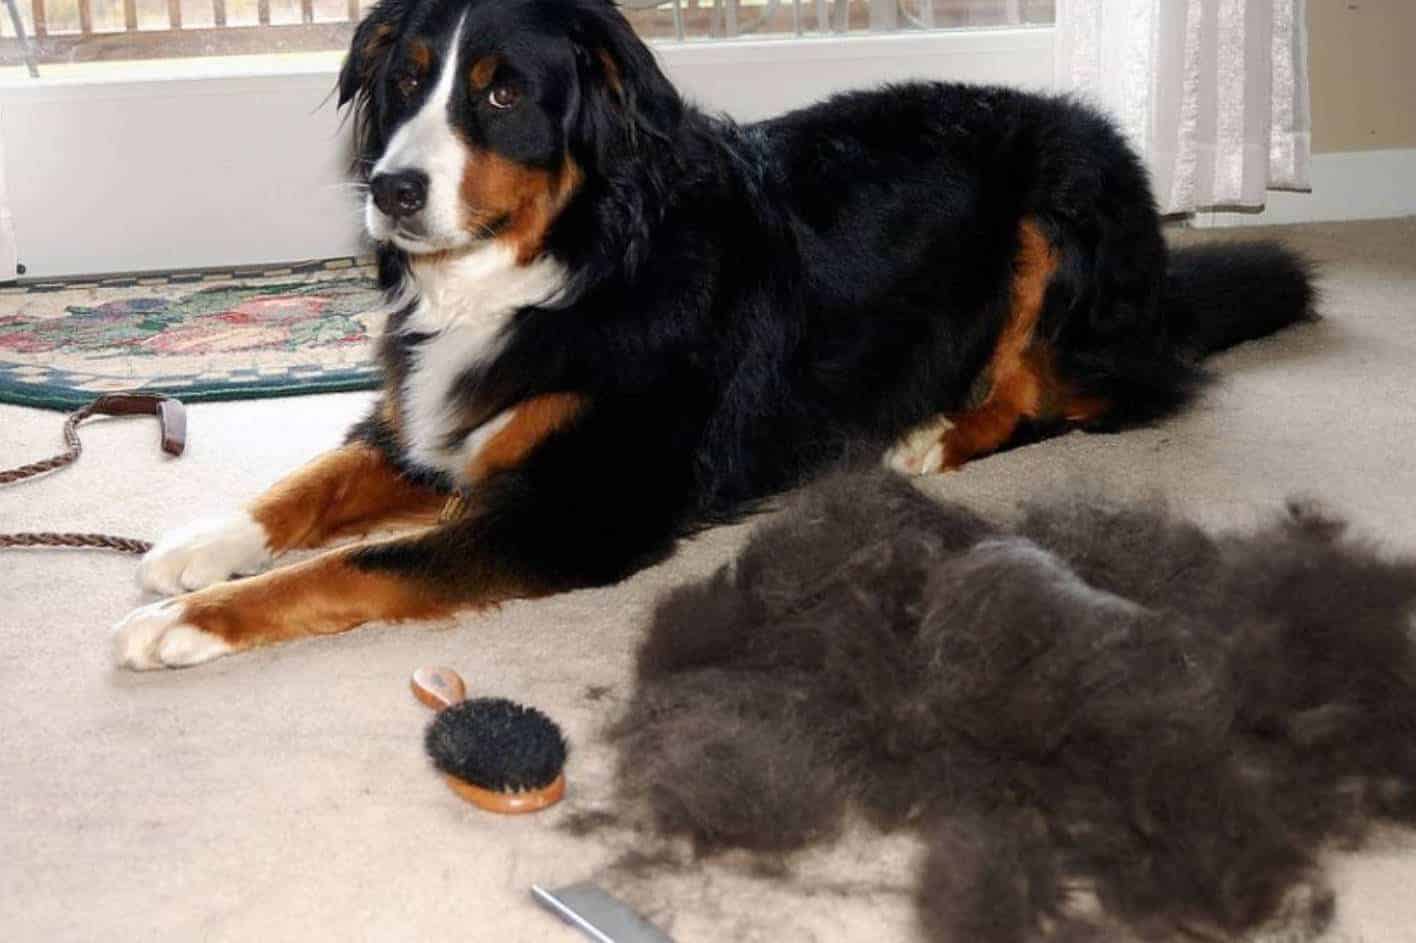 Start with your dog’s health and grooming